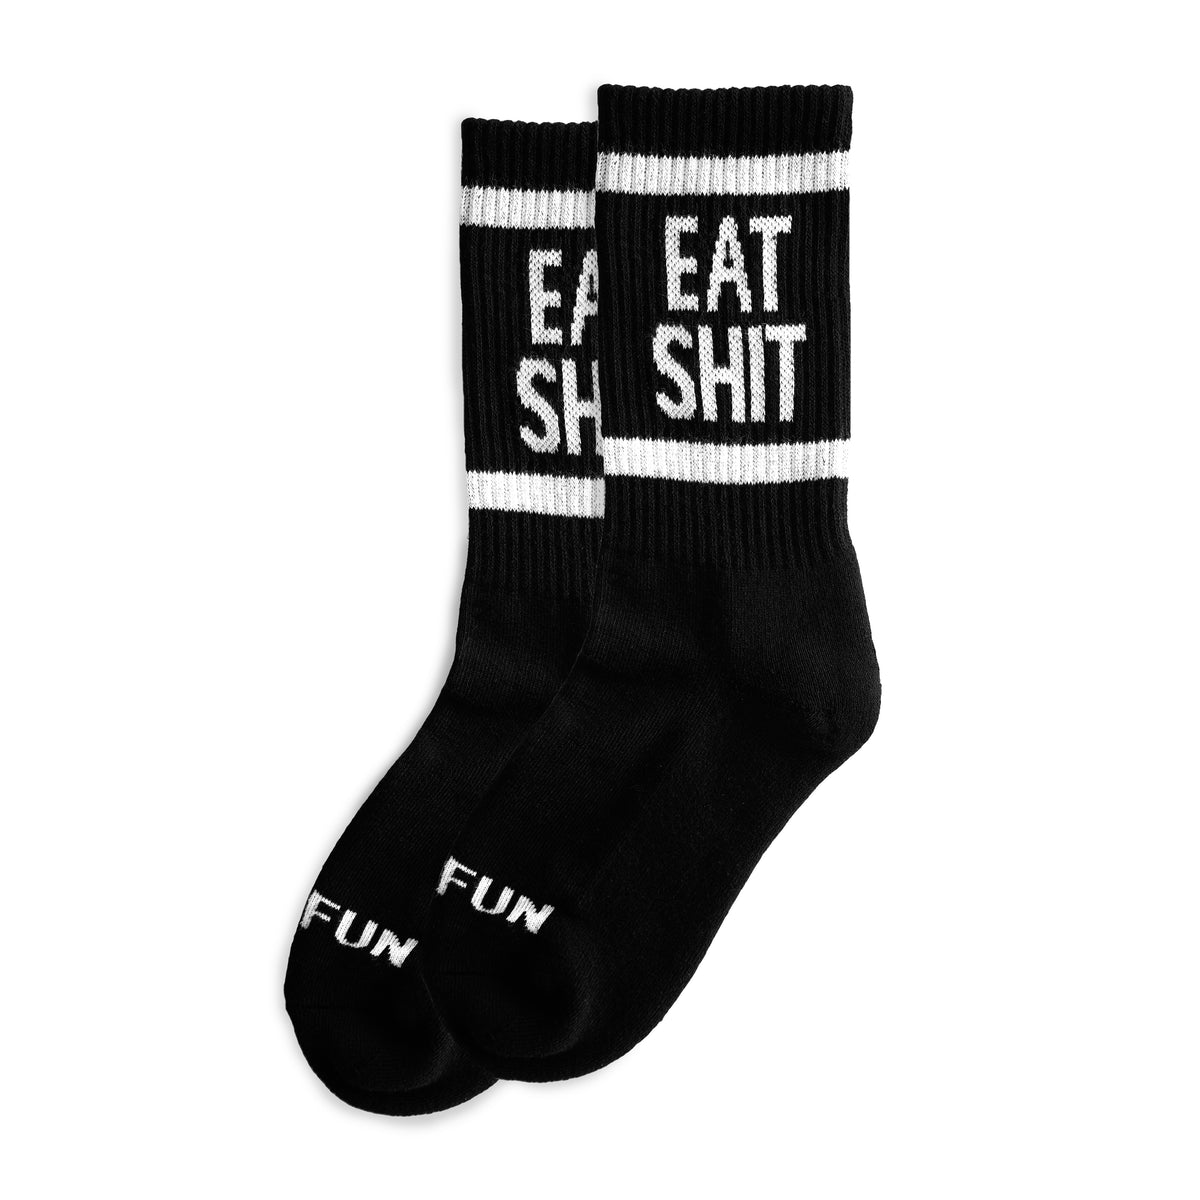 "Eat Shit" Socks by No Fun®. Crewneck hight socks are black, with black heel and toe cap. The phrase "Eat Shit" is woven in white into the leg of the sock. There is a white band found above, and below the "Eat Shit" text. "No Fun®" is woven in white, just above the black toecap on the top.